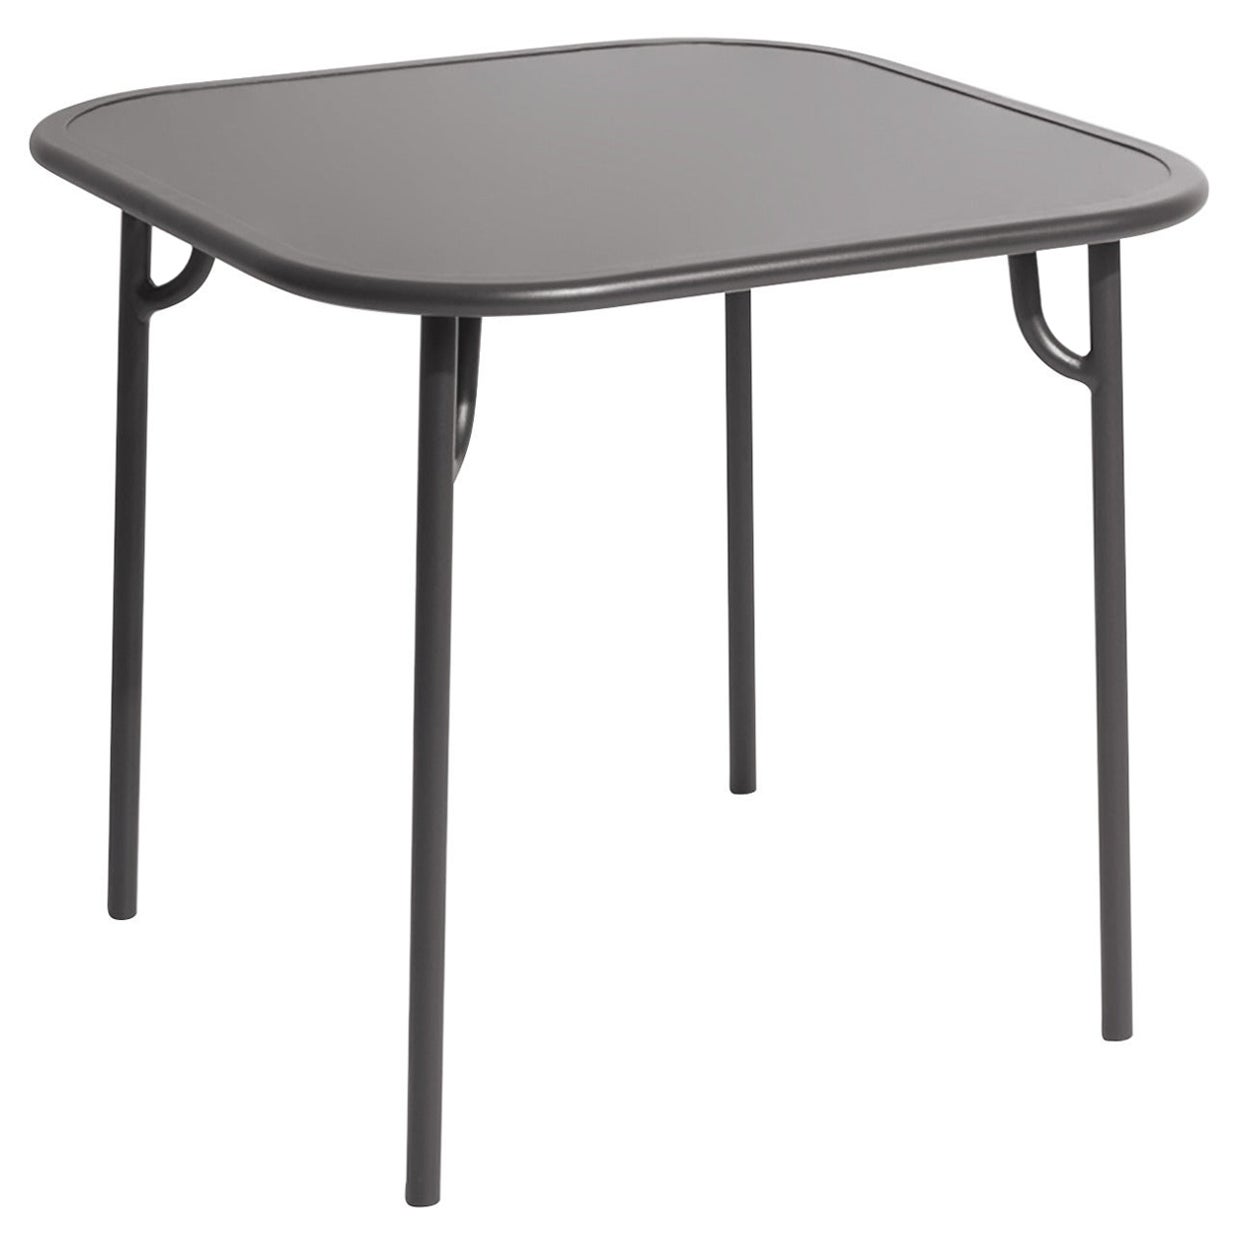 Petite Friture Week-End Plain Square Dining Table in Anthracite Aluminium, 2017 For Sale